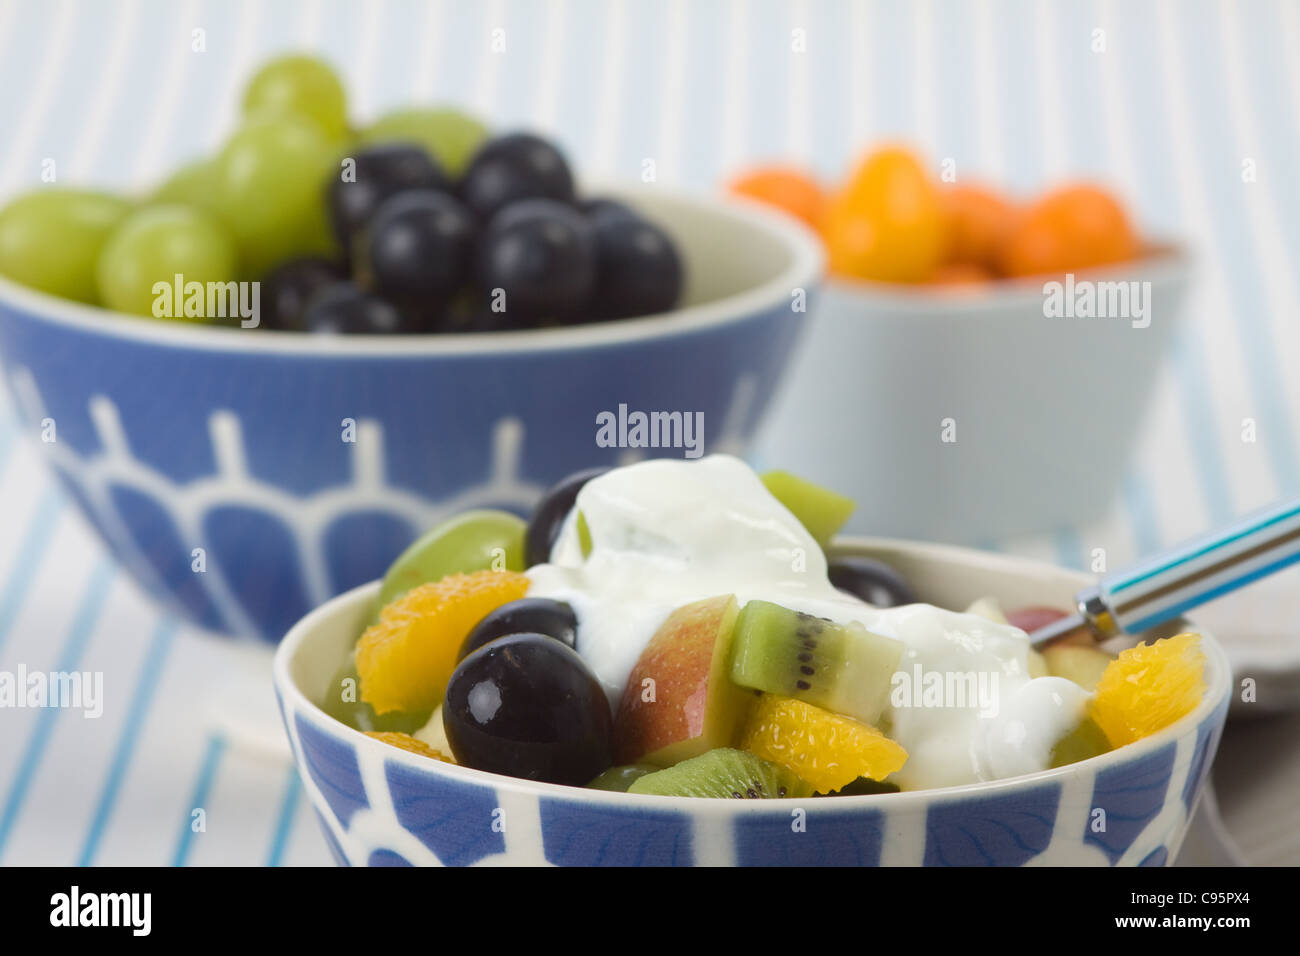 Fruit salad with different fruits Stock Photo